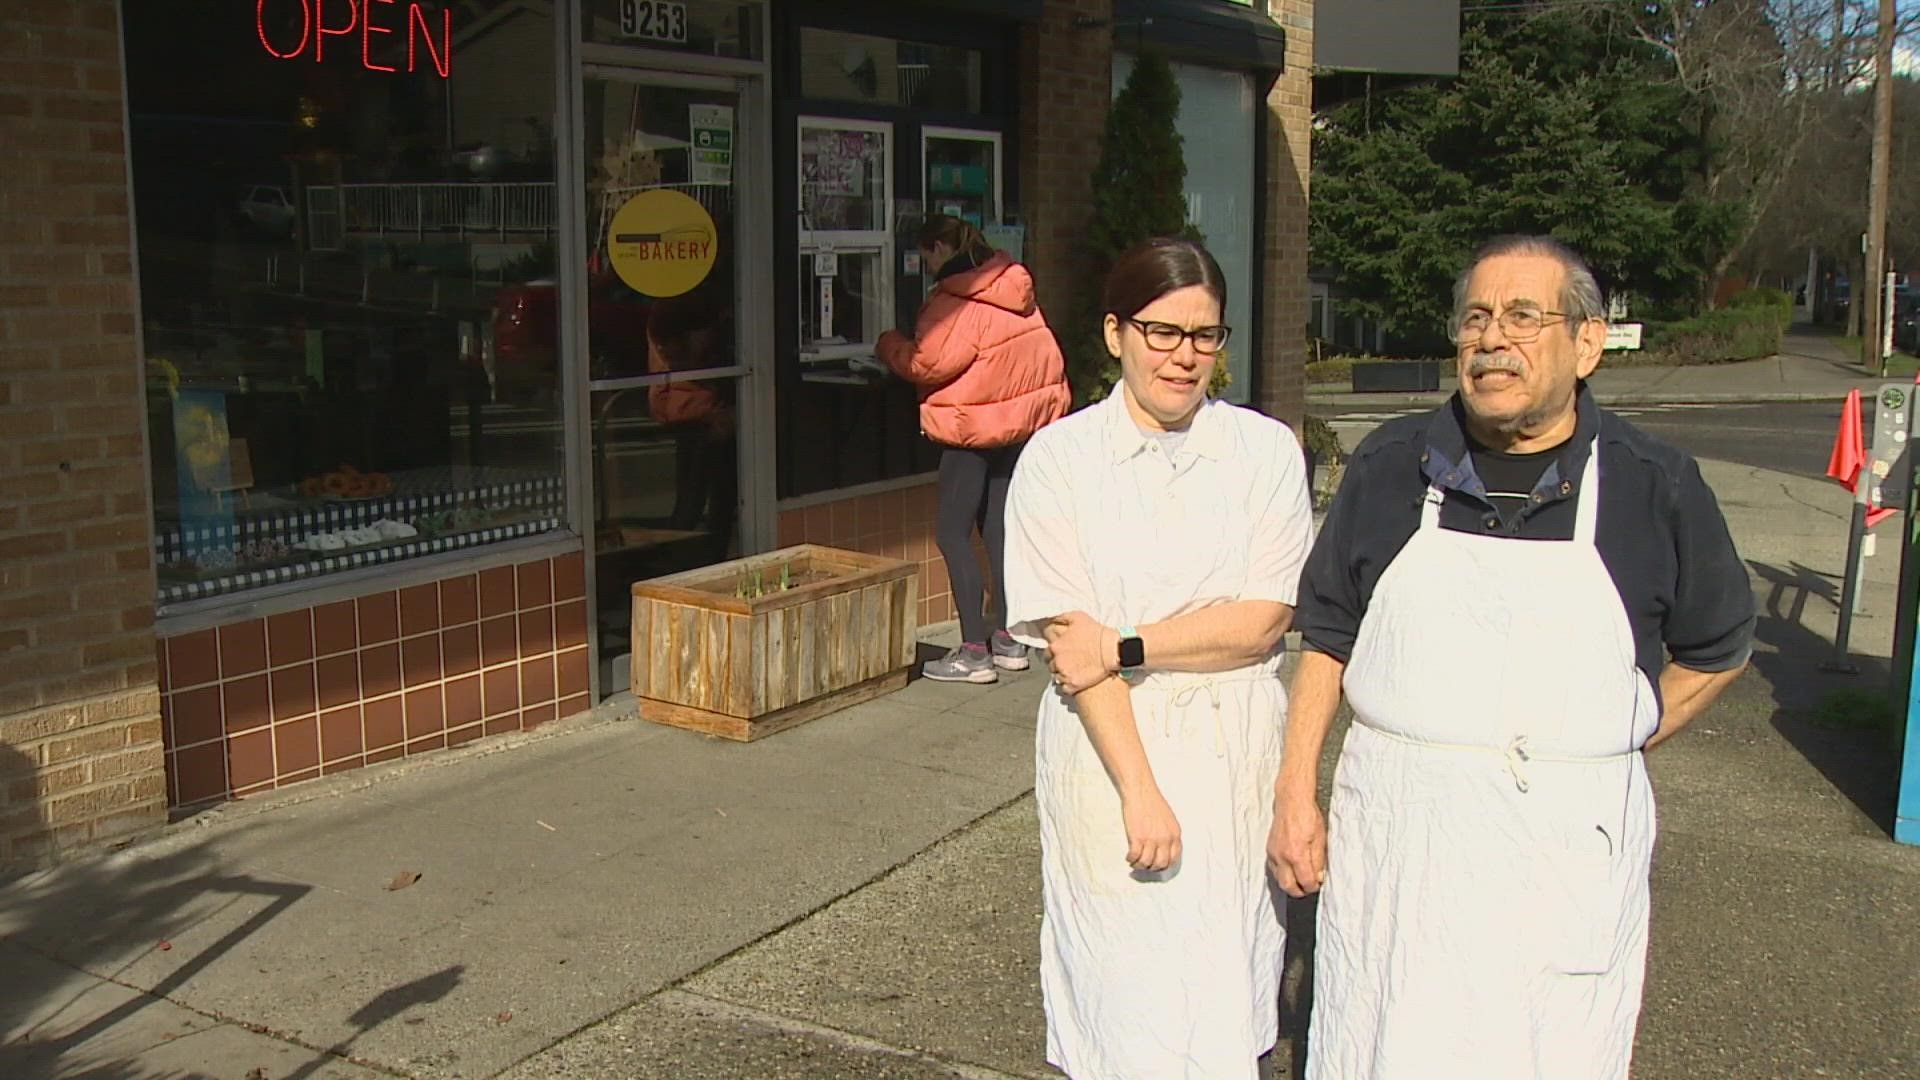 Bernie Alonzo bought The Original Bakery in 1975. Generations of families flocked to the business for sweet treats and that mom & pop shop sense of community.